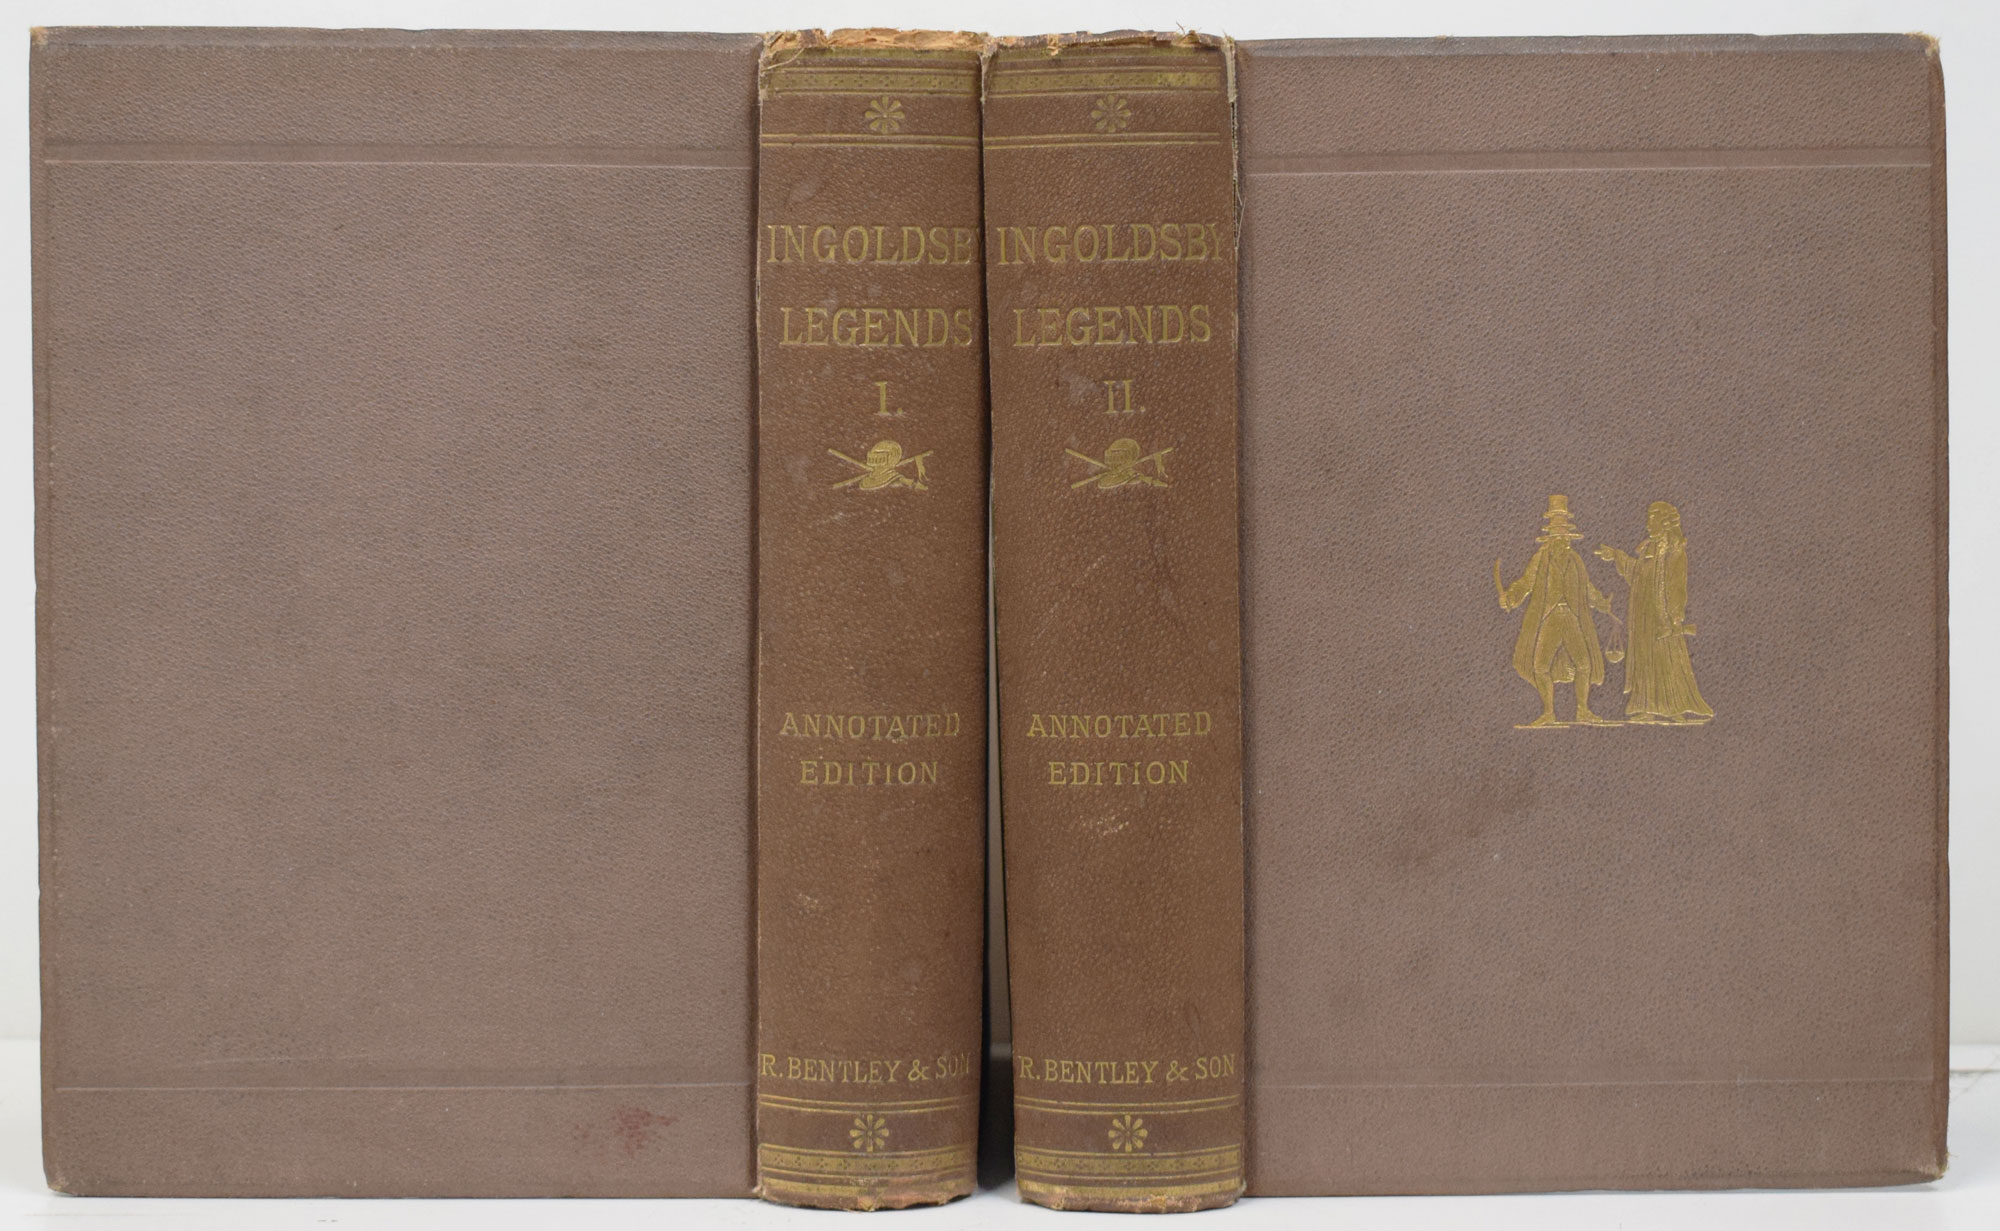 The Ingoldsby Legends, or Mirth & Marvels. Two volume set. Bentley edition.